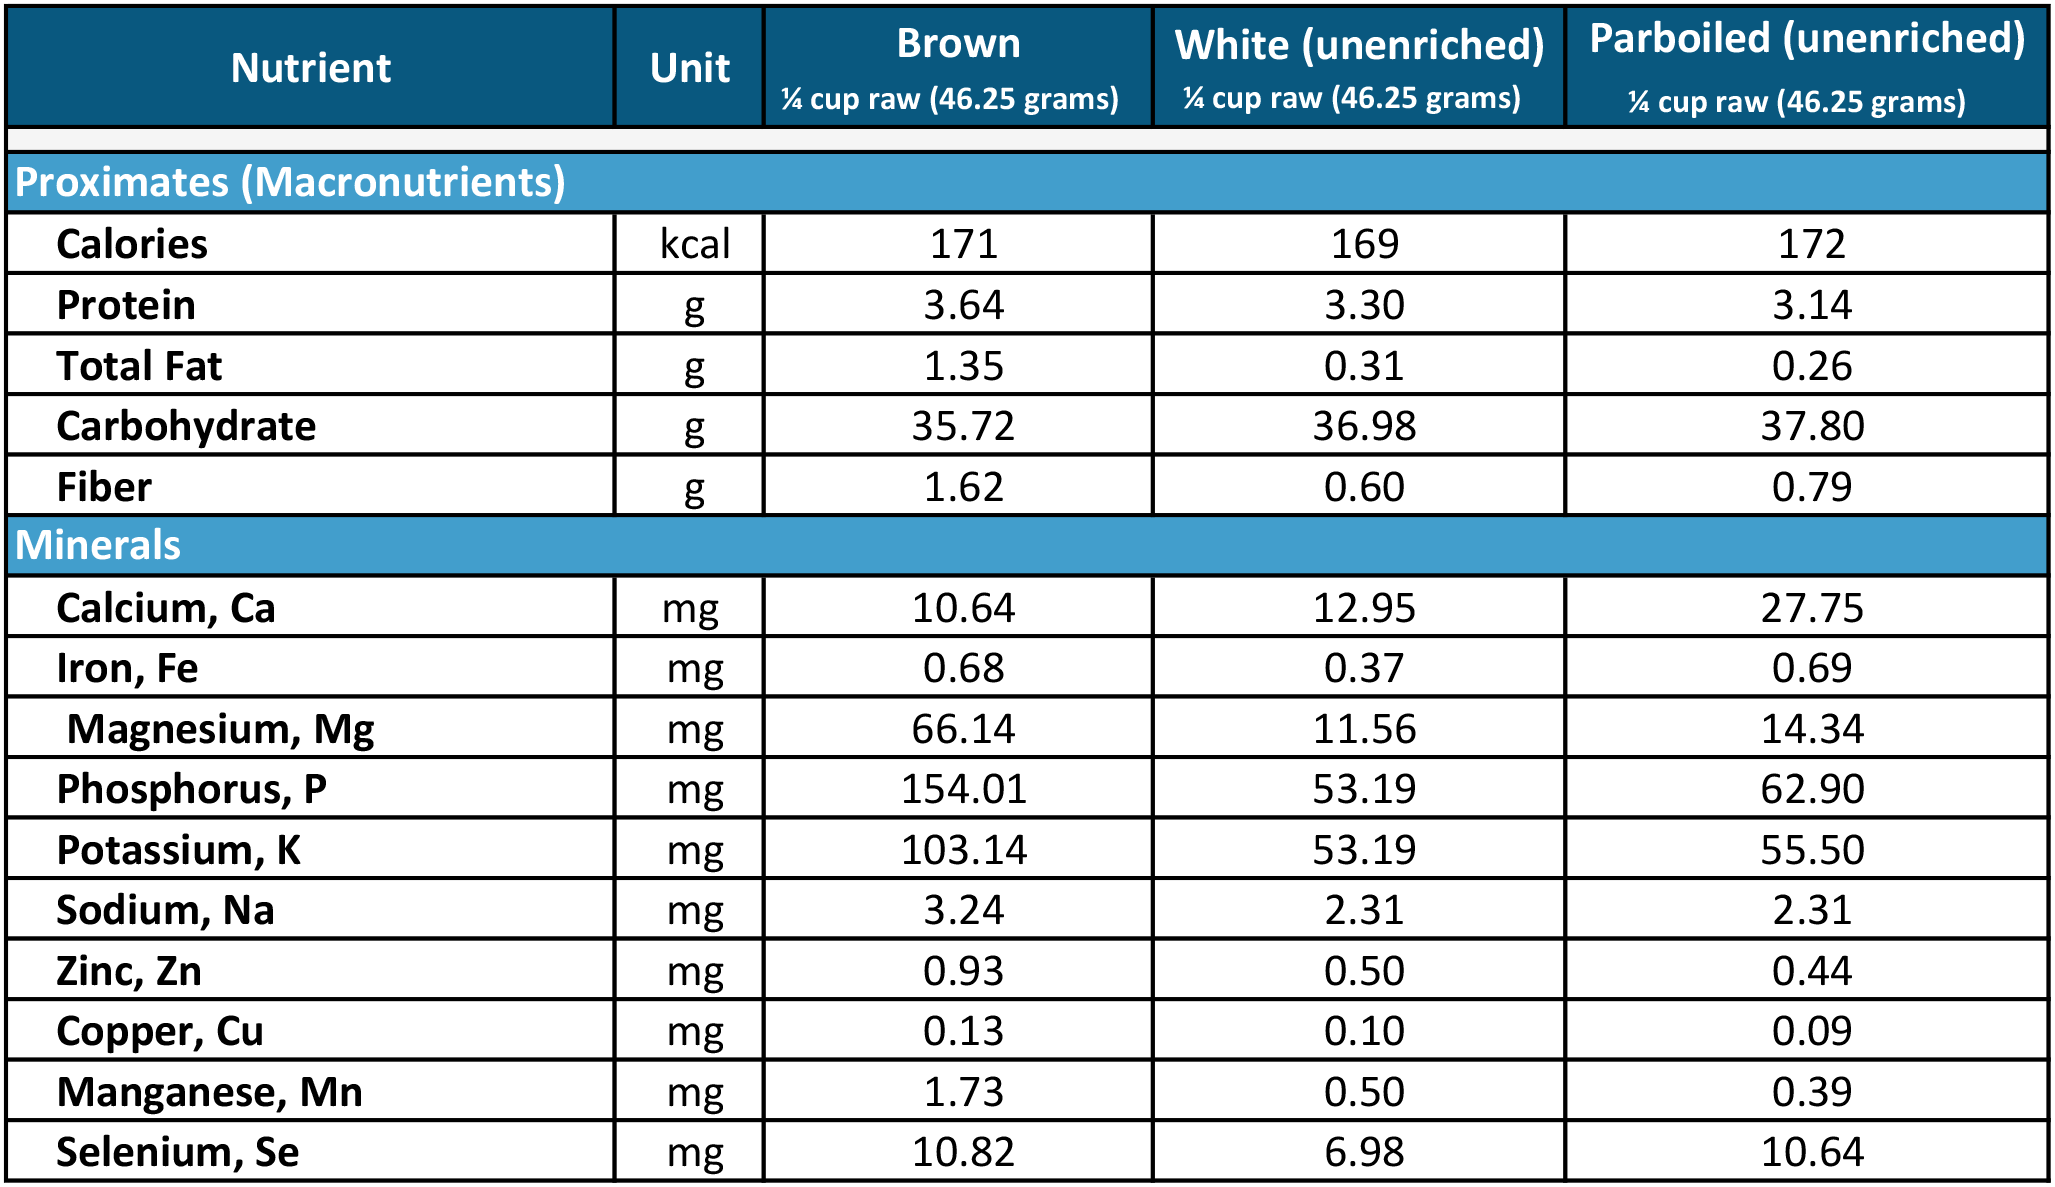 This is a chart that compares the nutrients of brown rice, unenriched white rice, and unenriched parboiled rice.